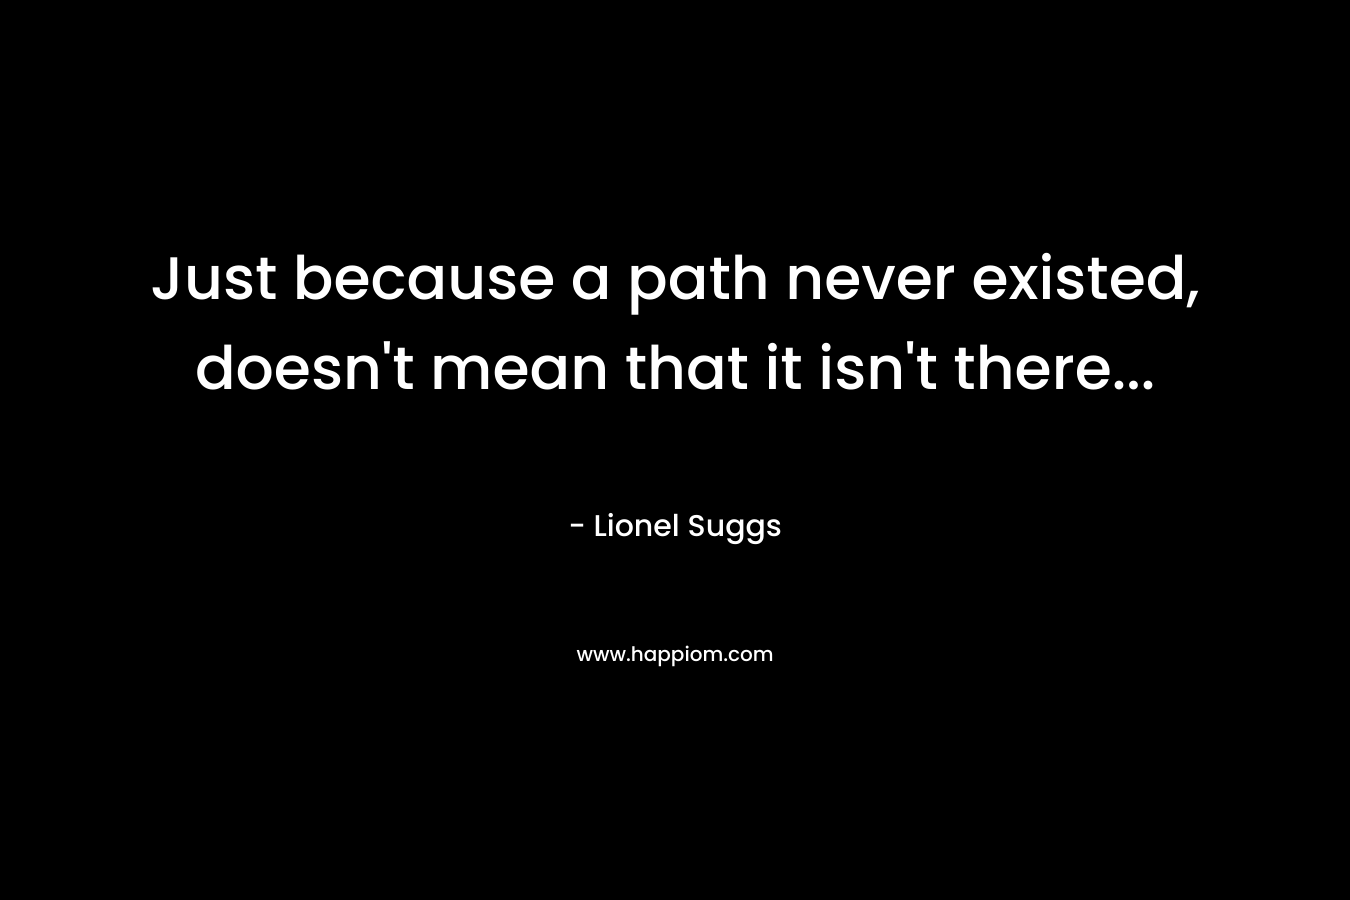 Just because a path never existed, doesn’t mean that it isn’t there… – Lionel Suggs